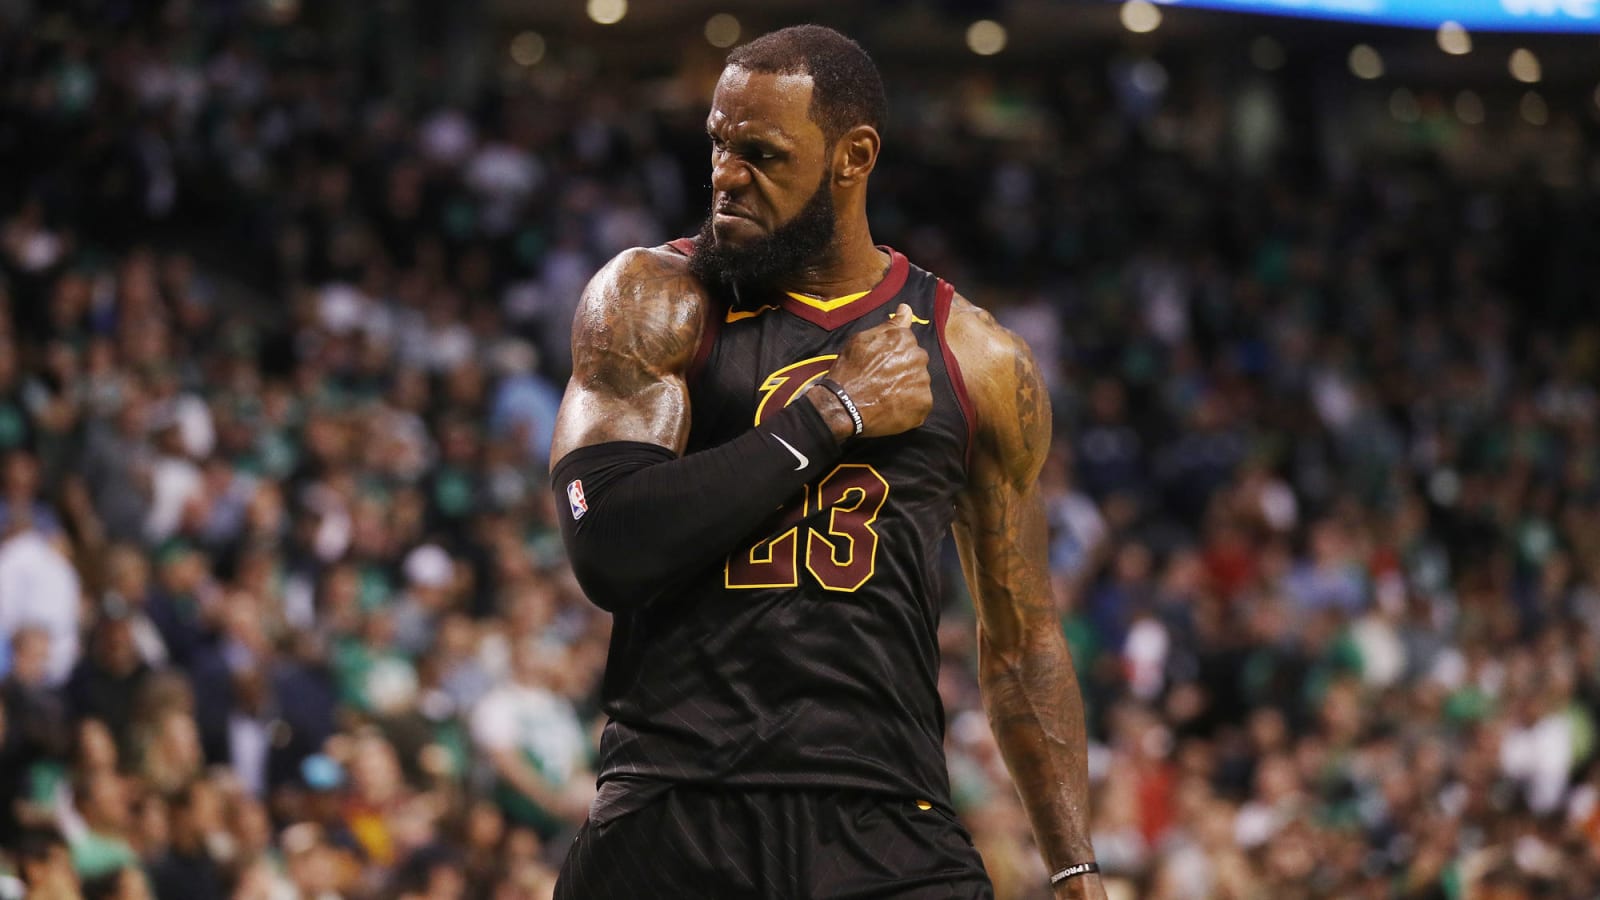 LeBron James relocates to Los Angeles to hunt the Warriors